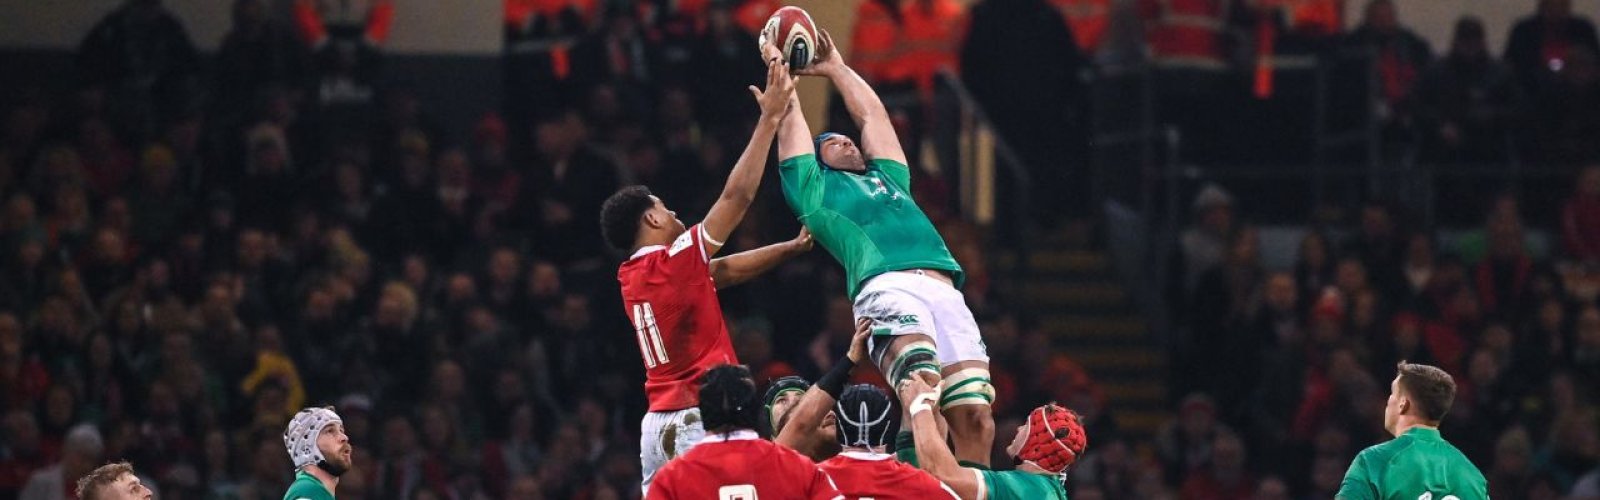 Wales v Ireland Guinness Six Nations ticket hospitality package for rugby fans image